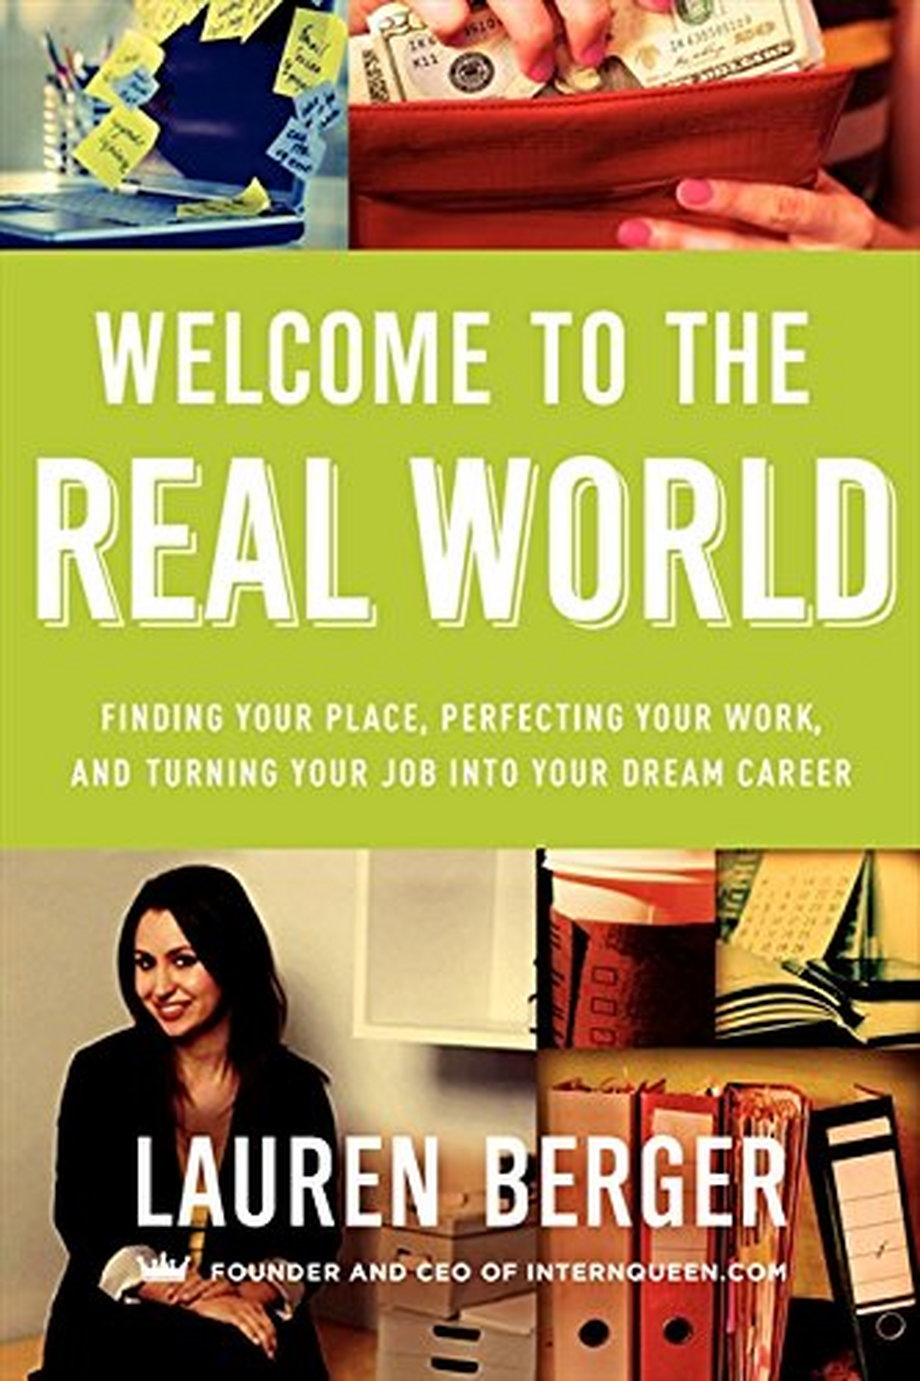 'Welcome to the Real World' by Lauren Berger